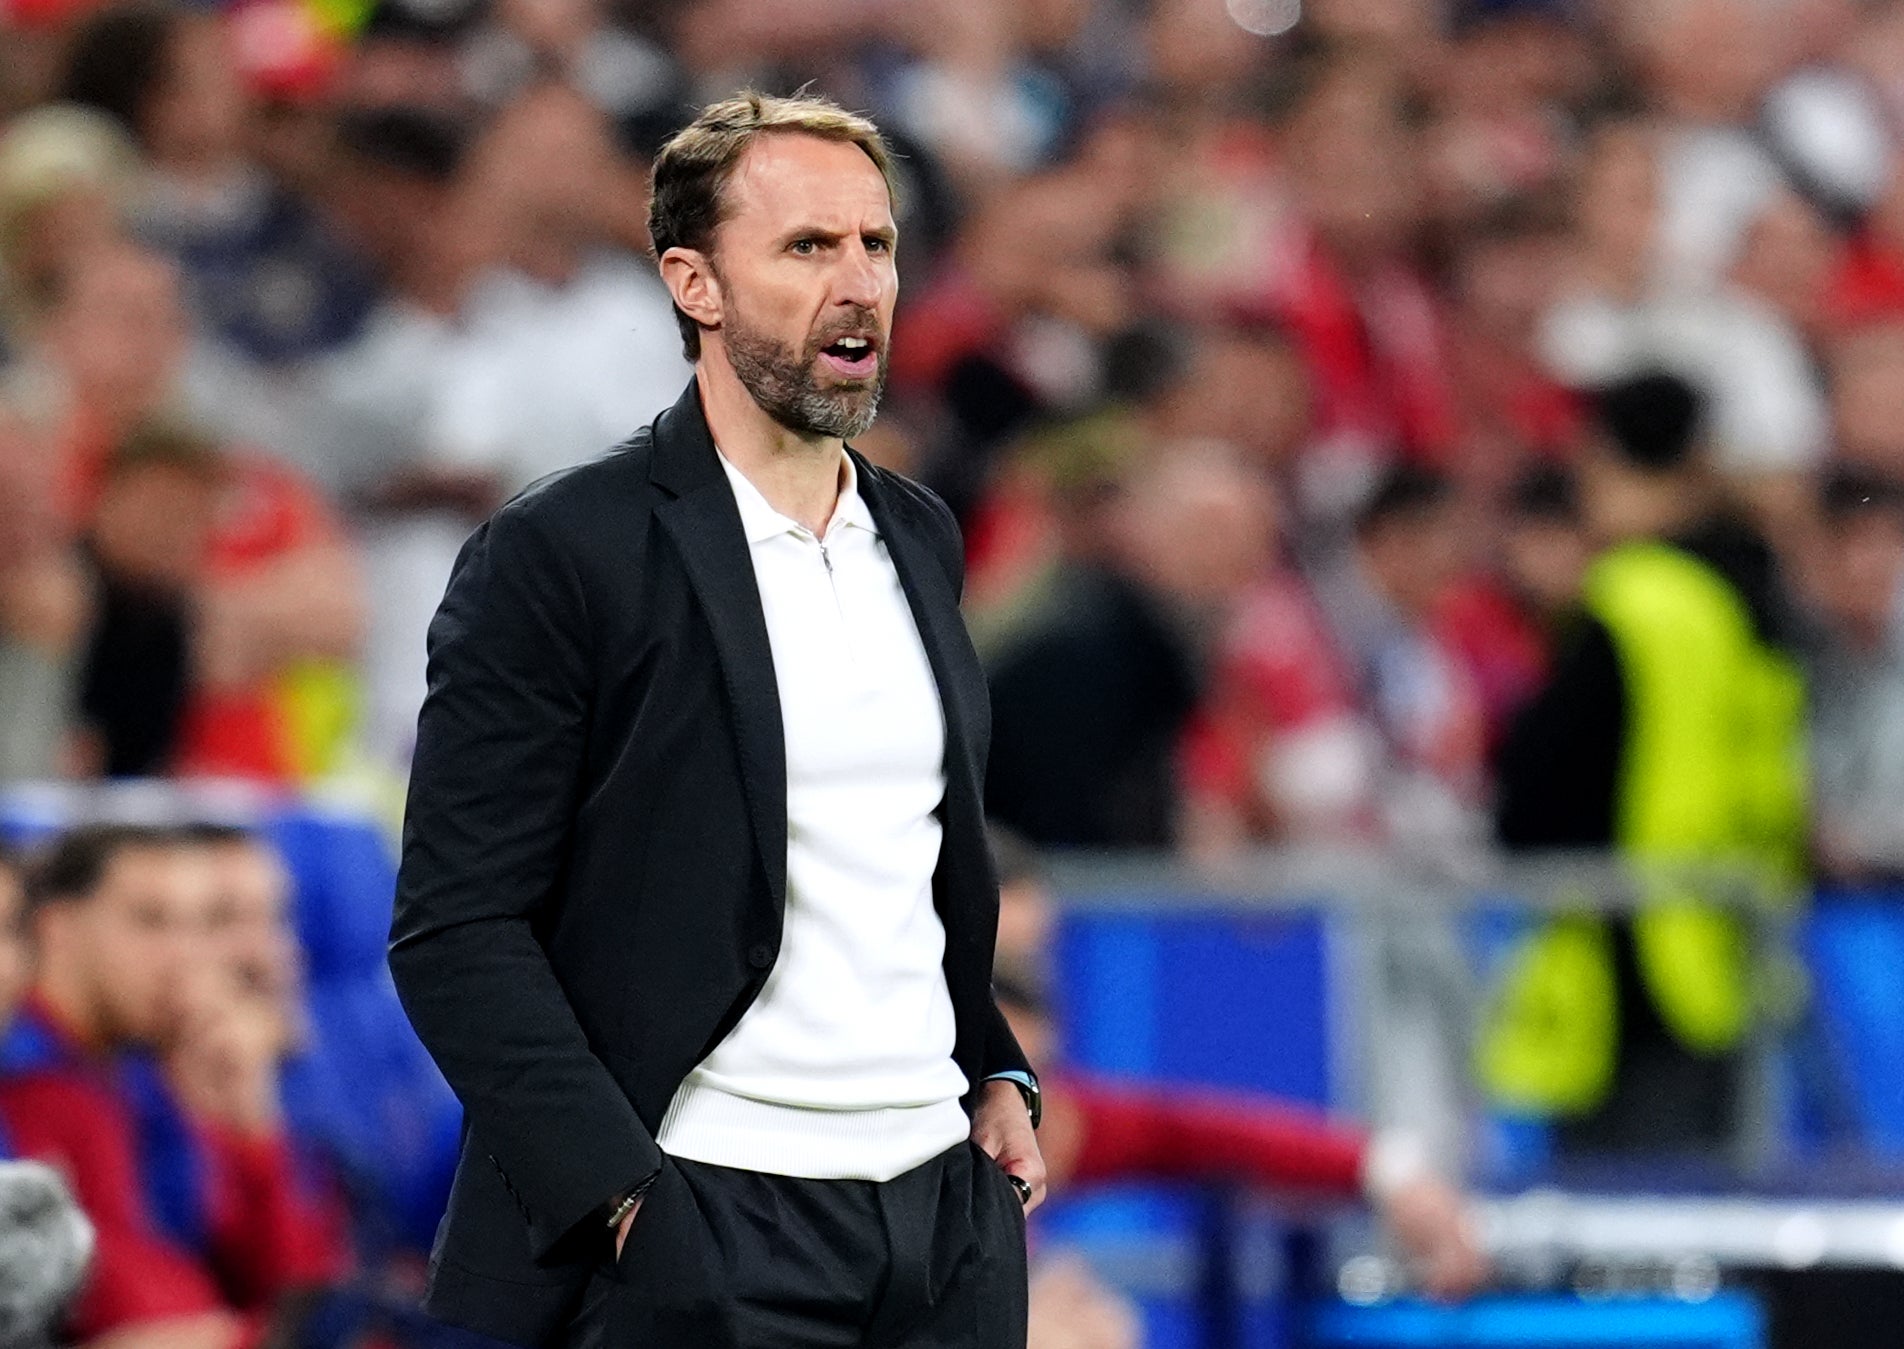 England head coach Southgate has some puzzles to solve before the next match